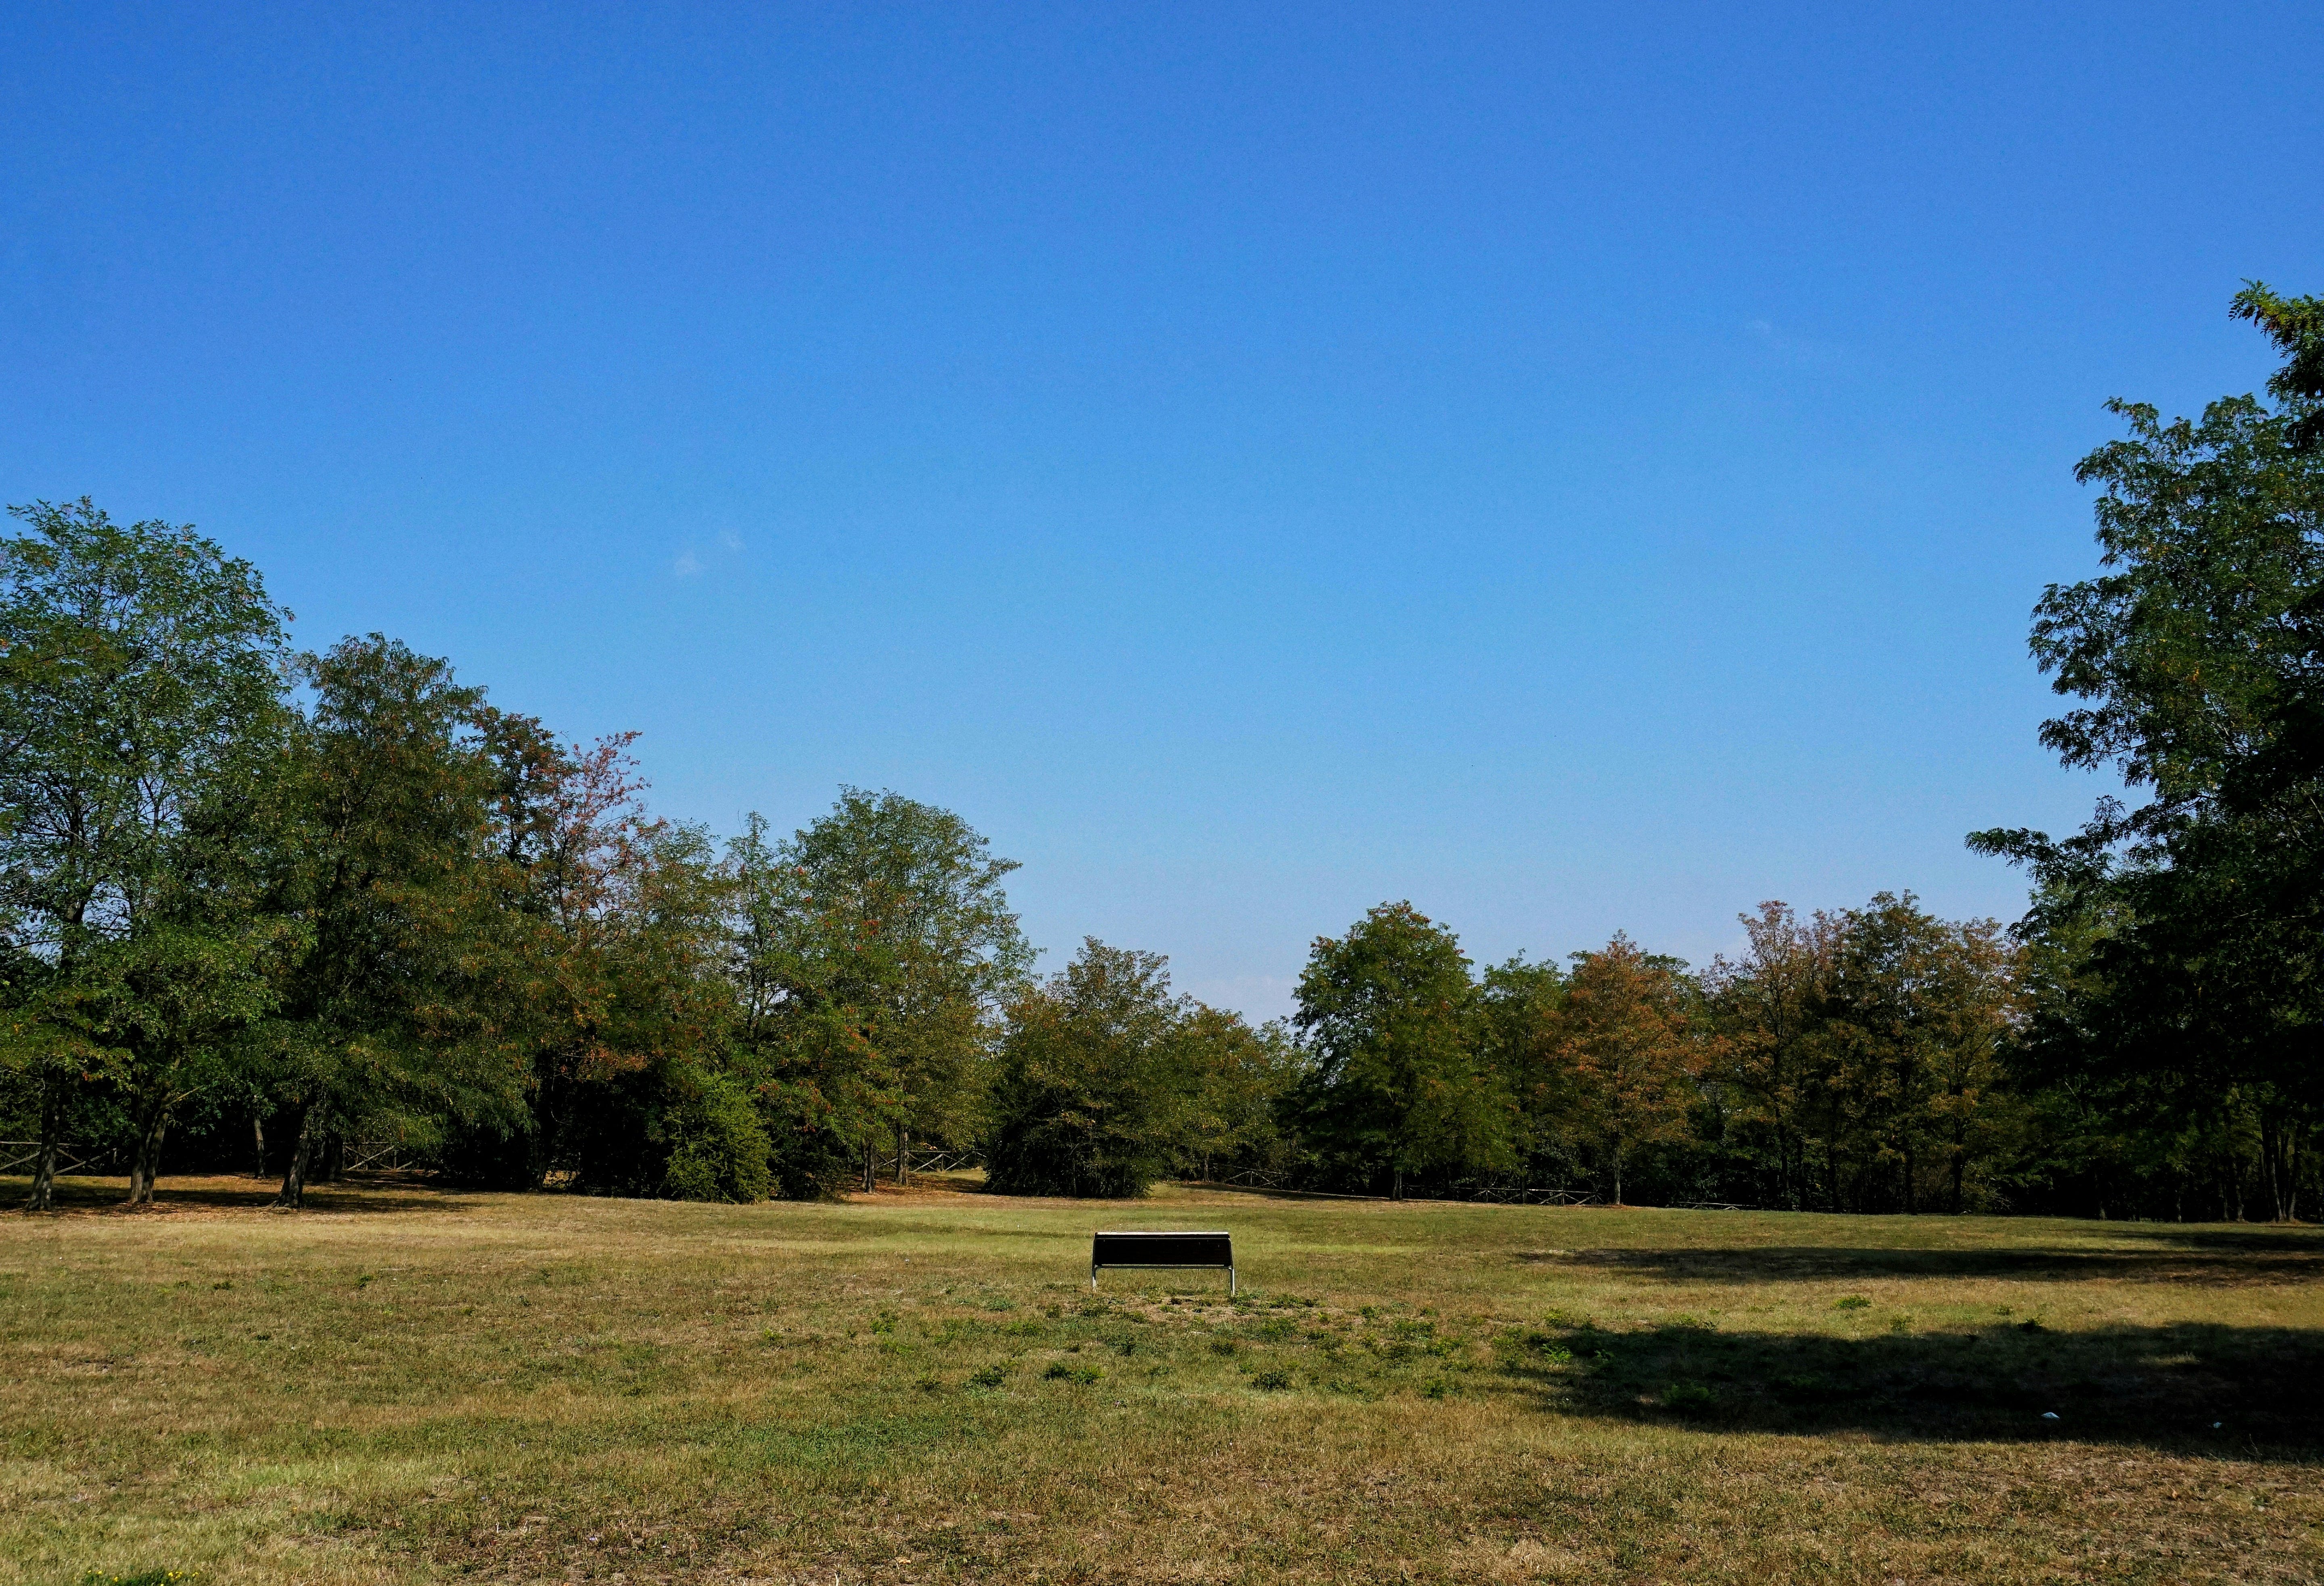 A bench sits on a patch of wide open grass, as if in a park or woods. The grass is a mix of greens and light browns which suggest it is late summer. There are green trees, full of leaves on the edges of the image. The sky is a bright and radiant blue. The writer is trying to convey the idea of a place you can work, this is out in the open